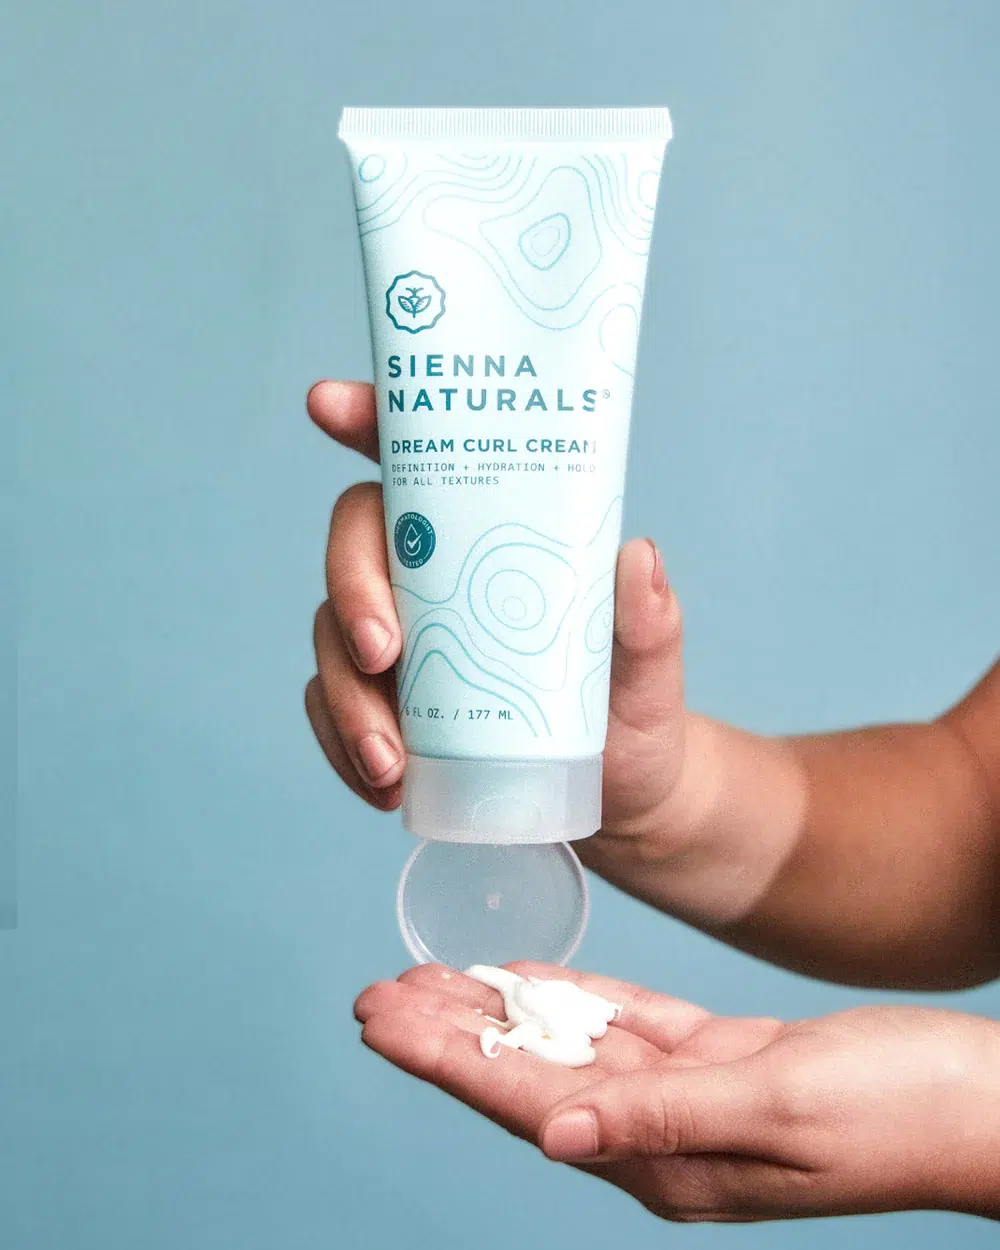 A hand squeezes a Sienna Naturals product into another hand. 